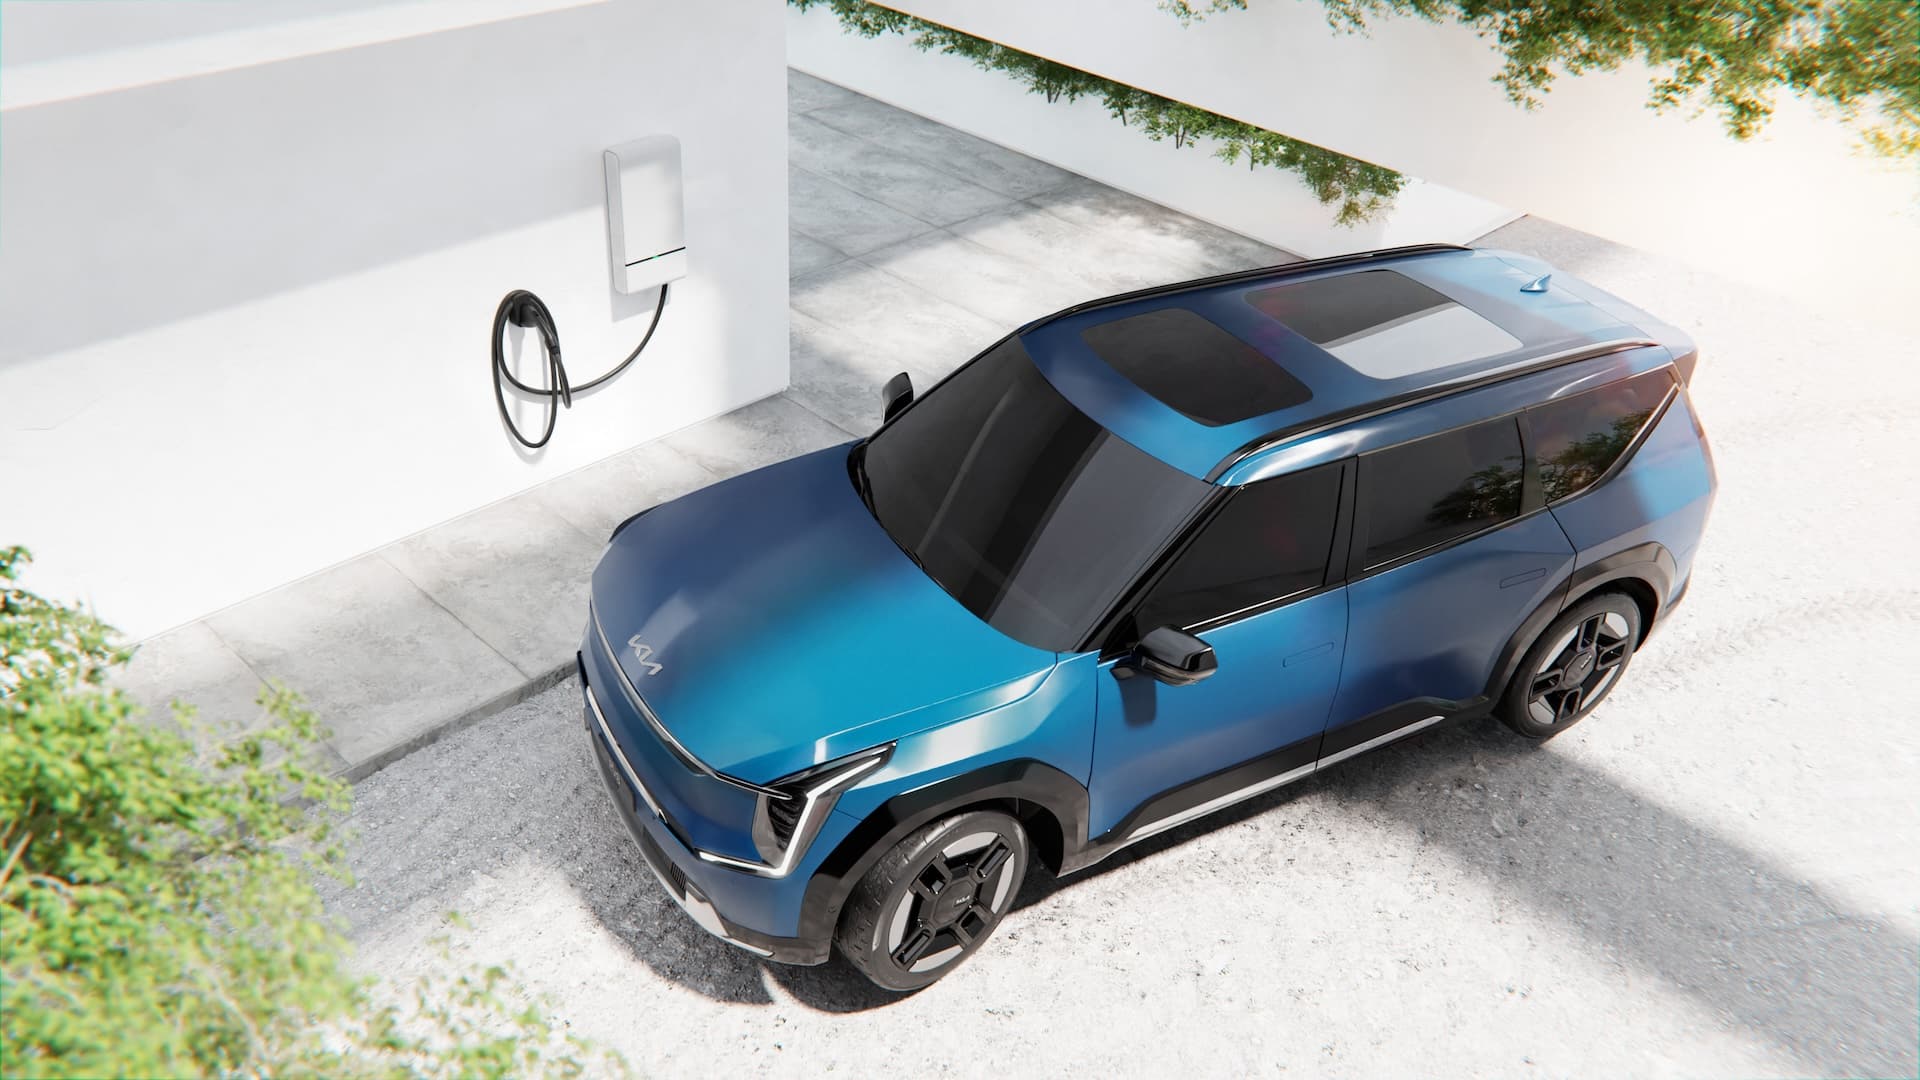 Kia America Joins Forces with Wallbox for Bidirectional Charging Partnership